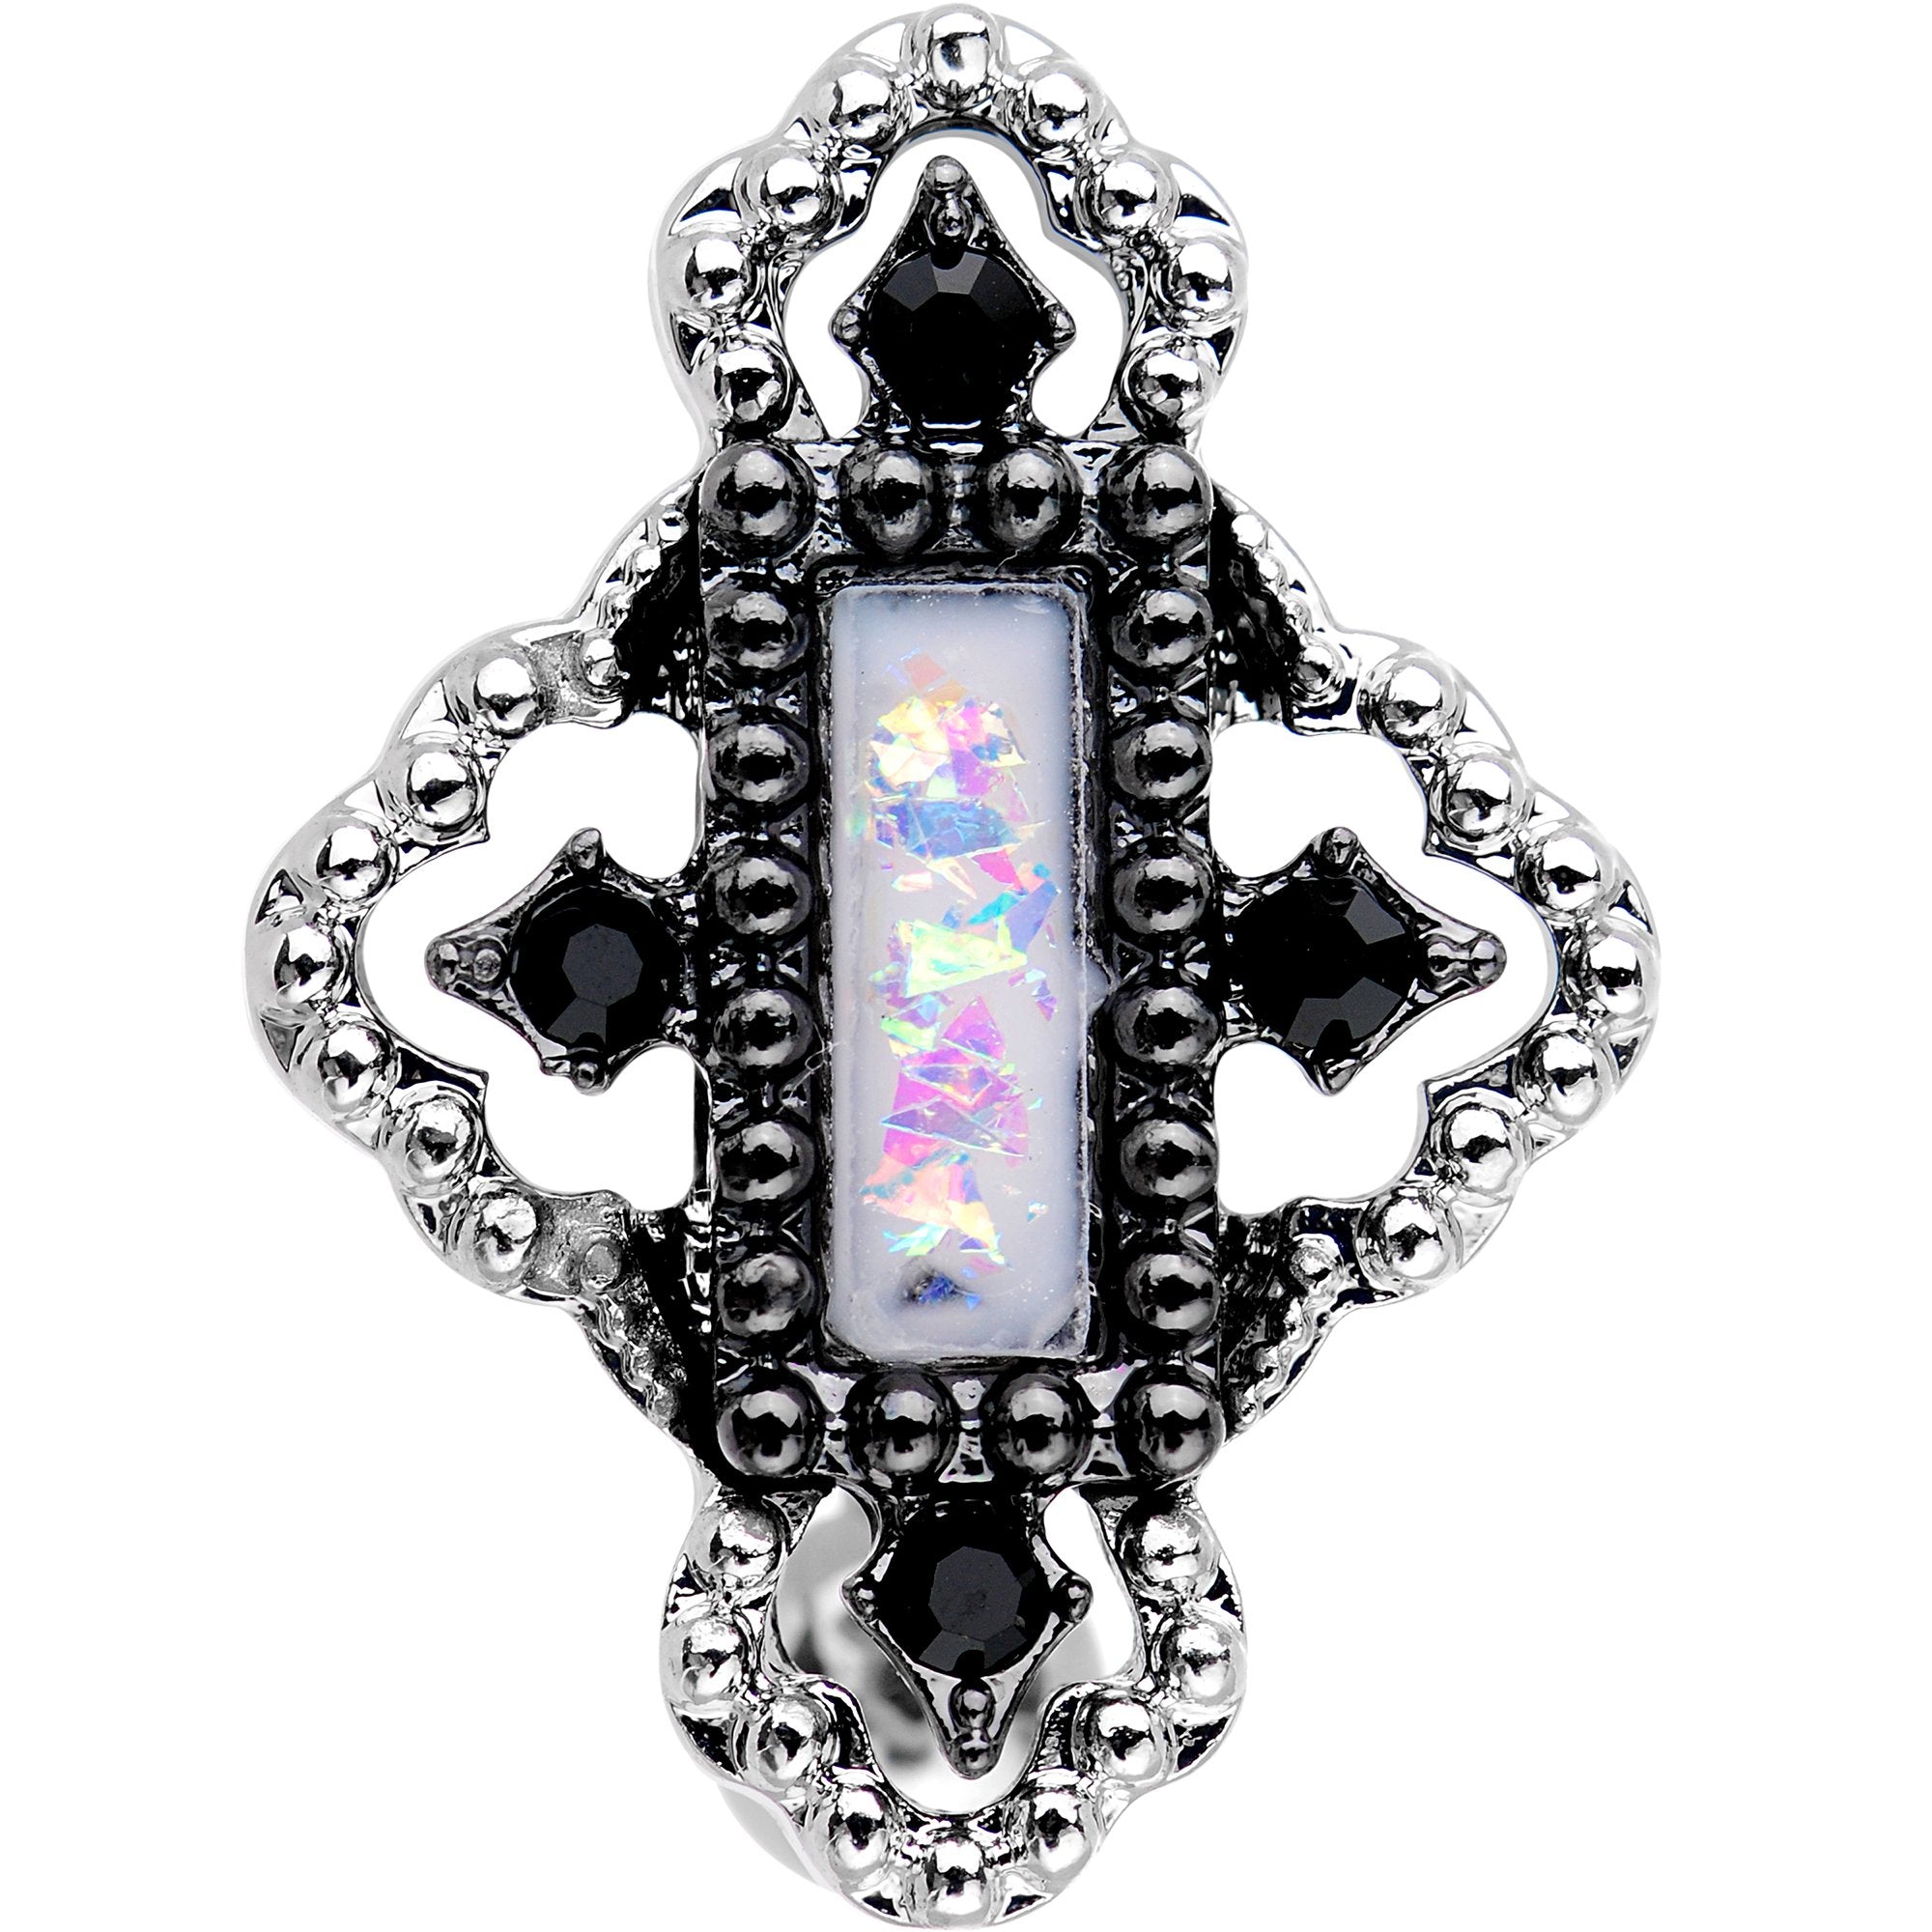 White Gem Confetti Party Pendant Top Mount Belly Ring